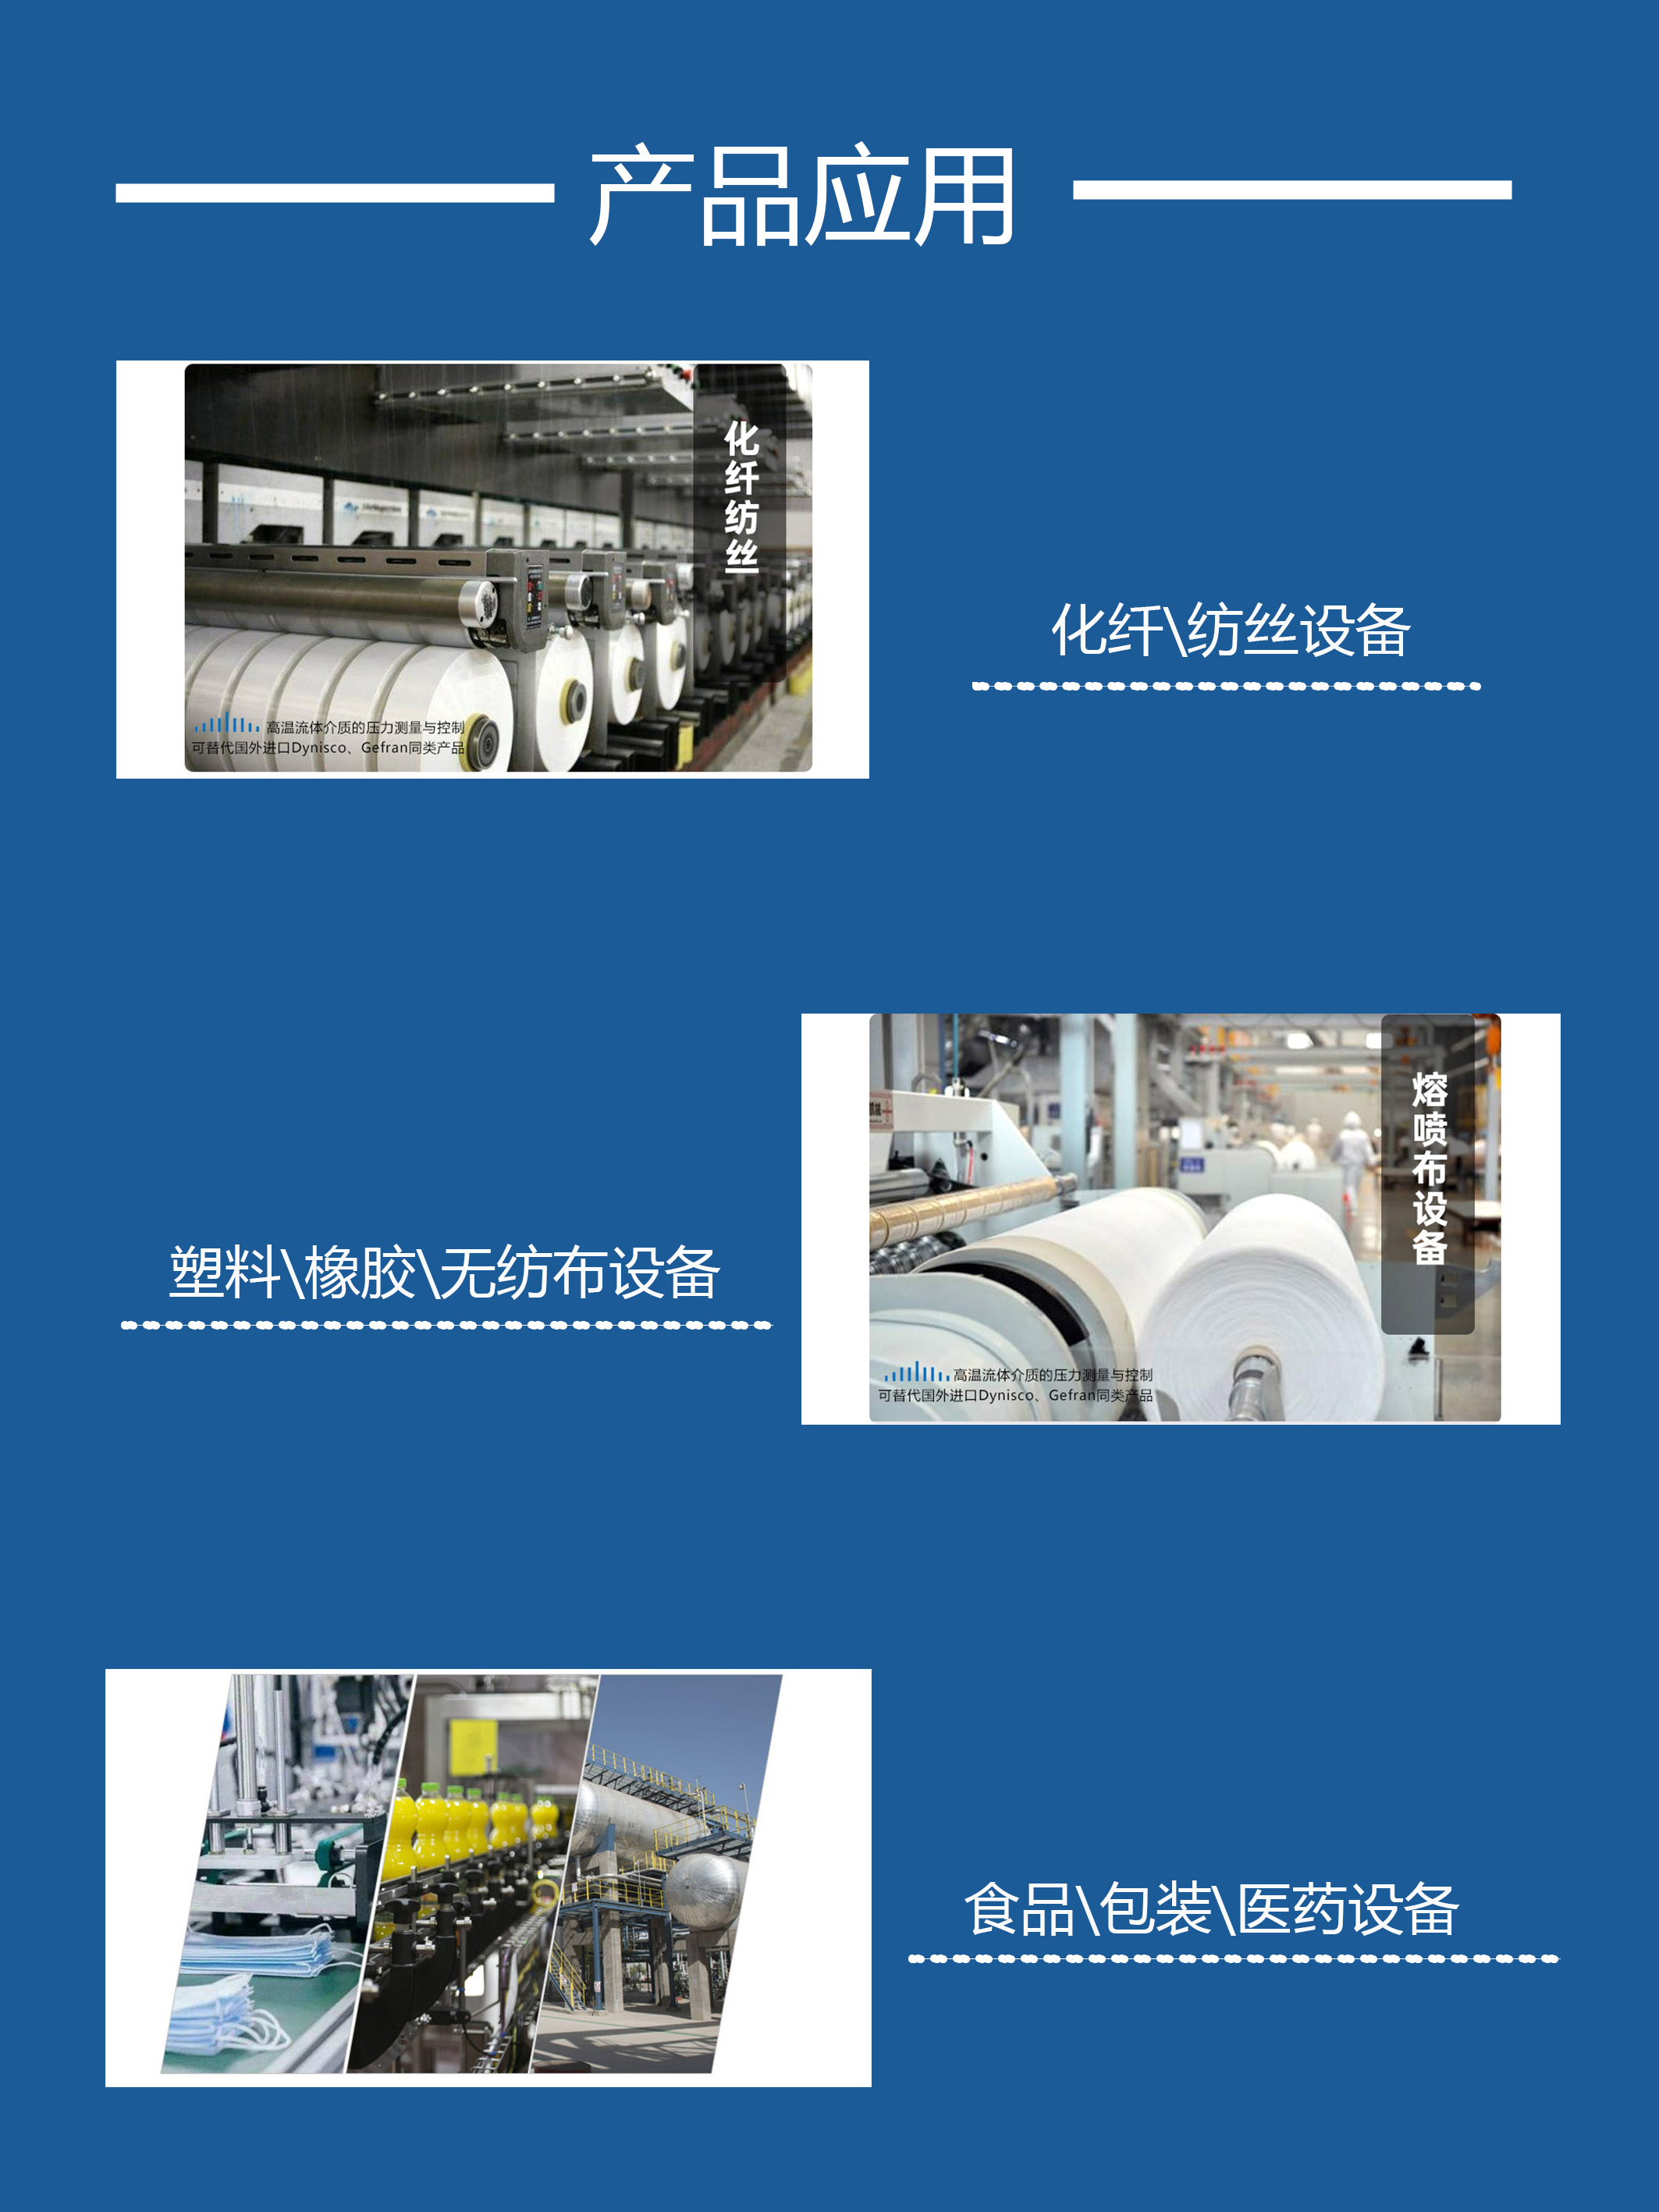 Replacing imported chemical fiber textile equipment with 1/2-20 interface high-temperature melt pressure sensor transmitter